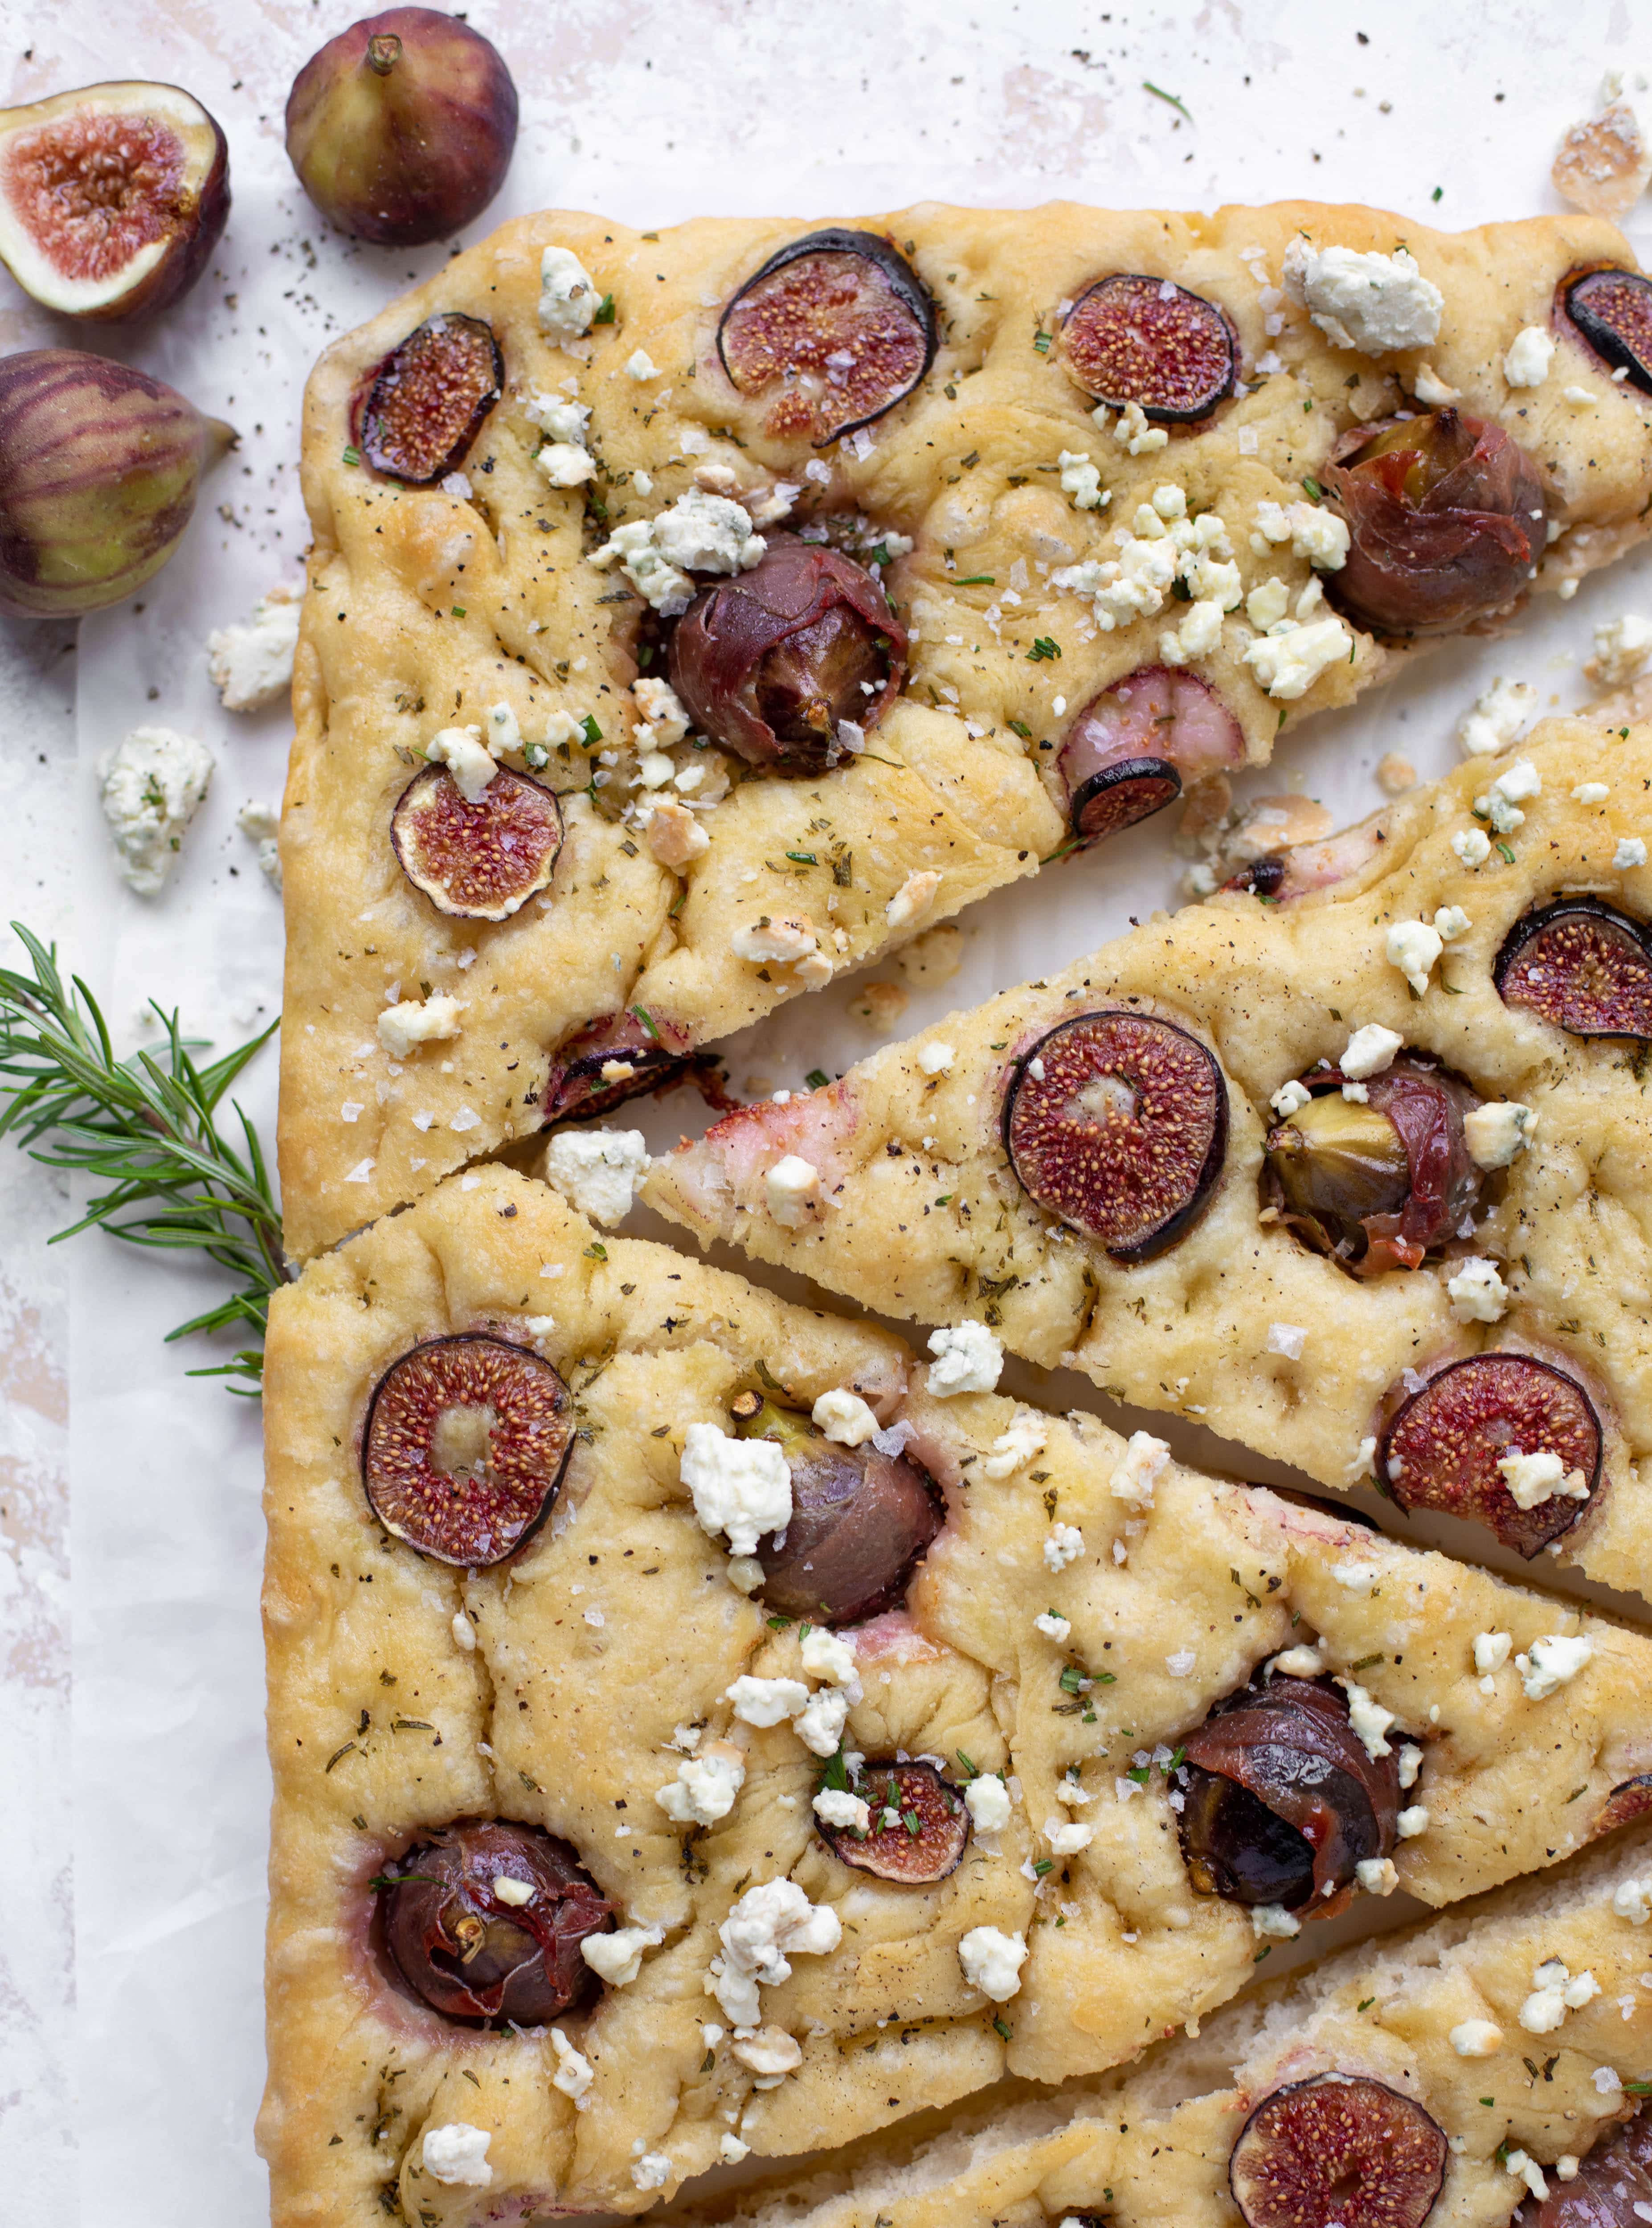 This stuffed fig focaccia bread is such an amazing way to use figs! Golden, toasty, salted focaccia studded with fig jewels. It's delicious and pretty!